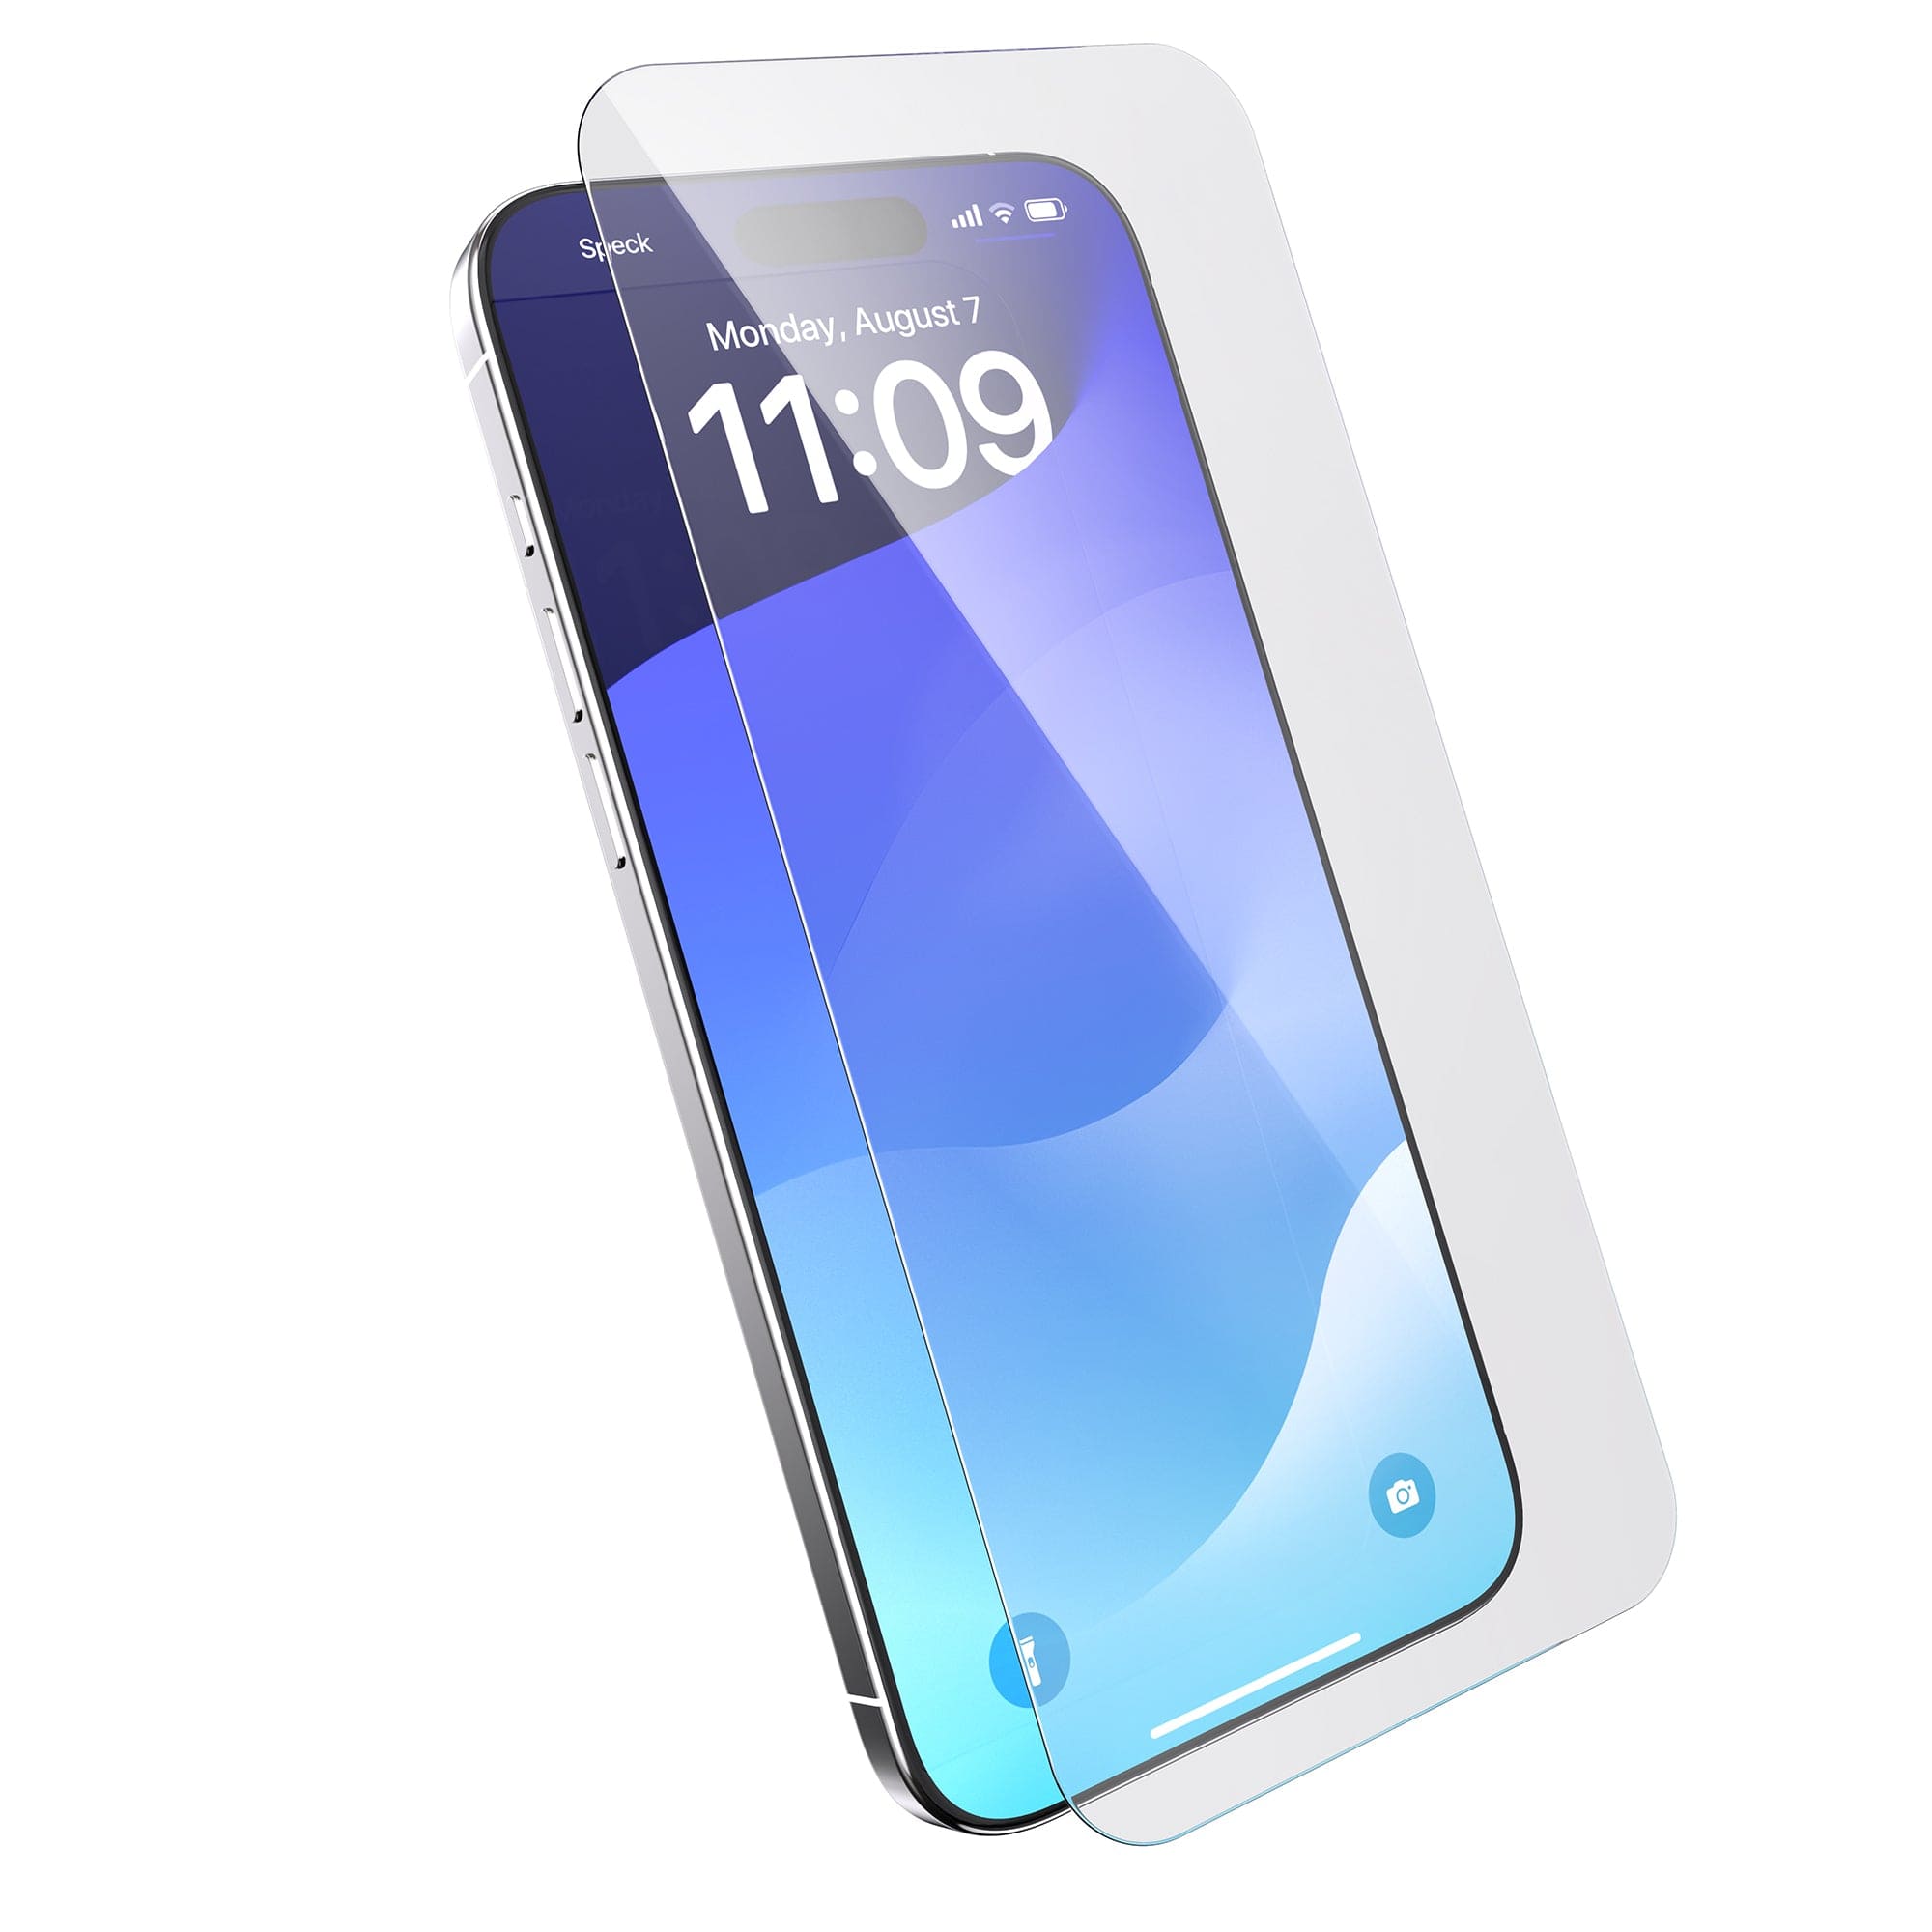 Speck ShieldView Glass iPhone 15 Pro Max Screen Protector Best iPhone 15  Pro Max - $49.99